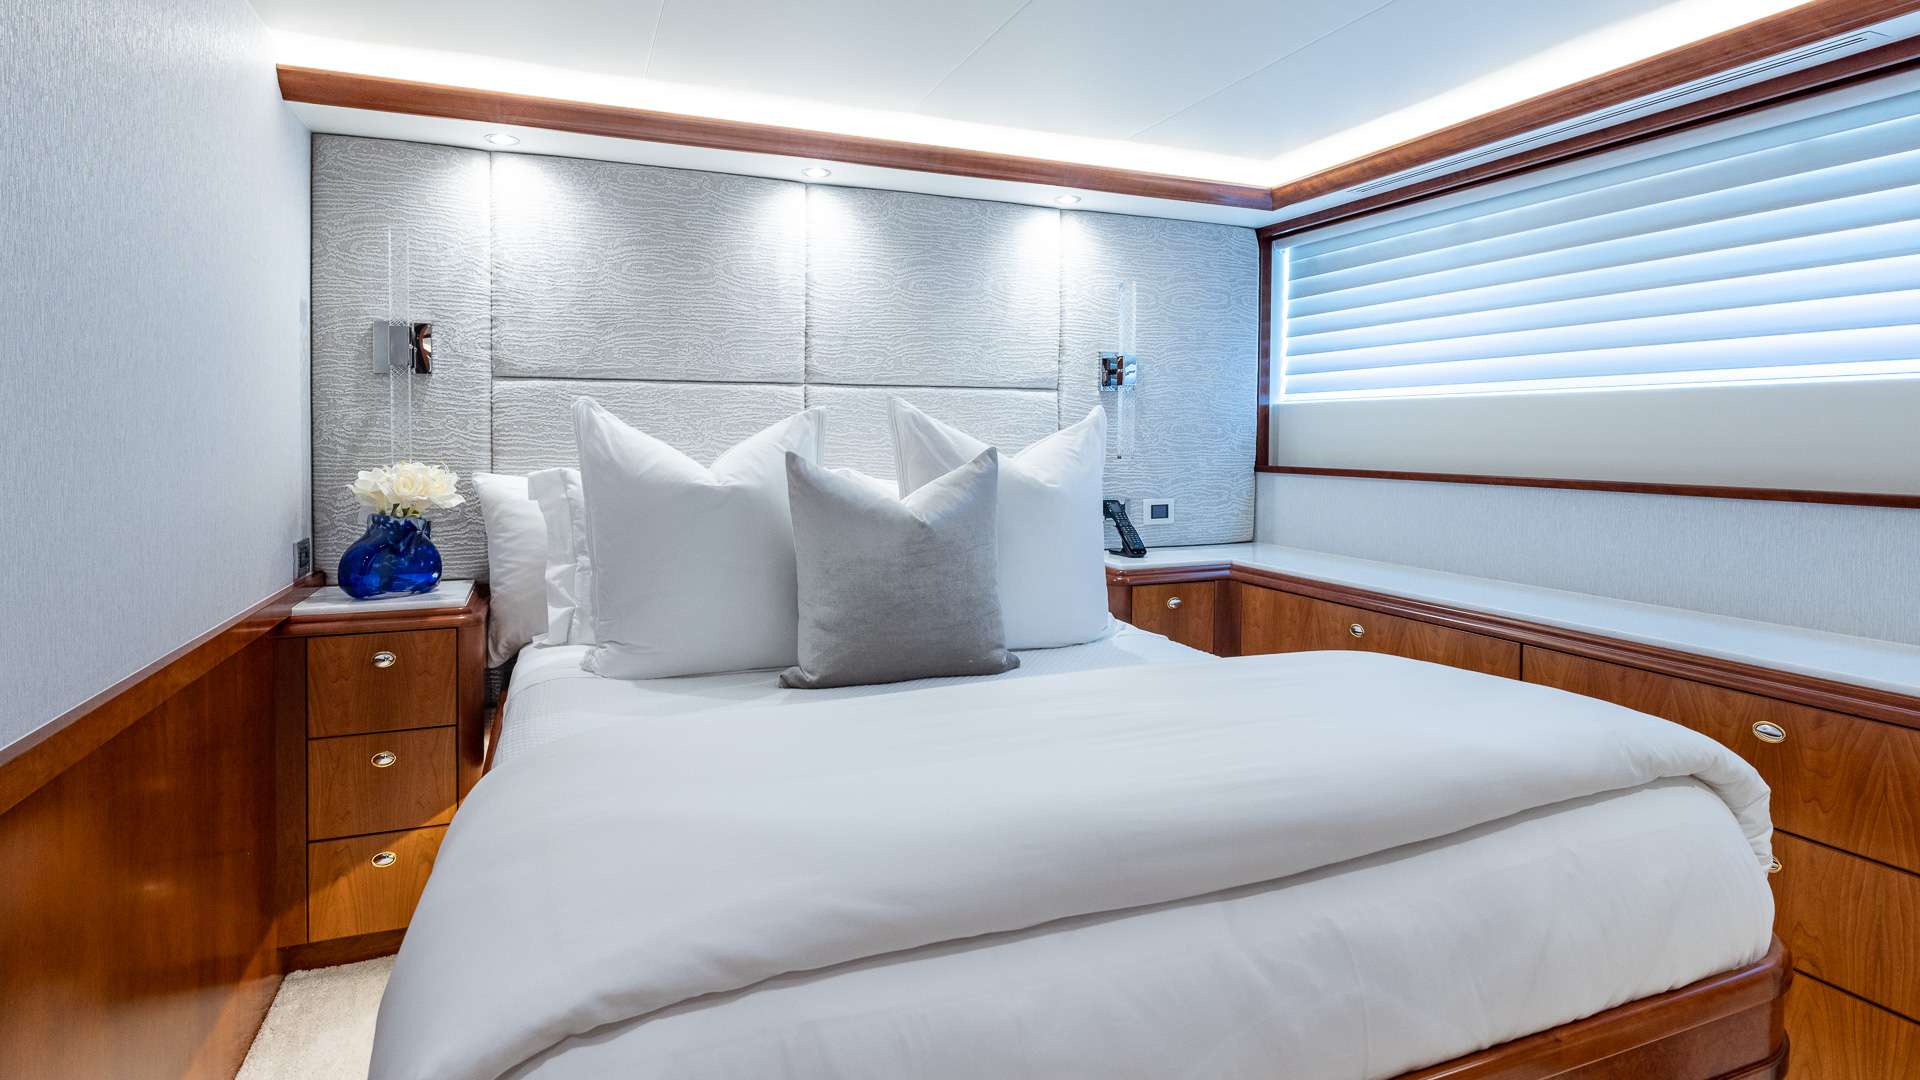 NO SHORTCUTS Yacht Charter - Port Queen Stateroom